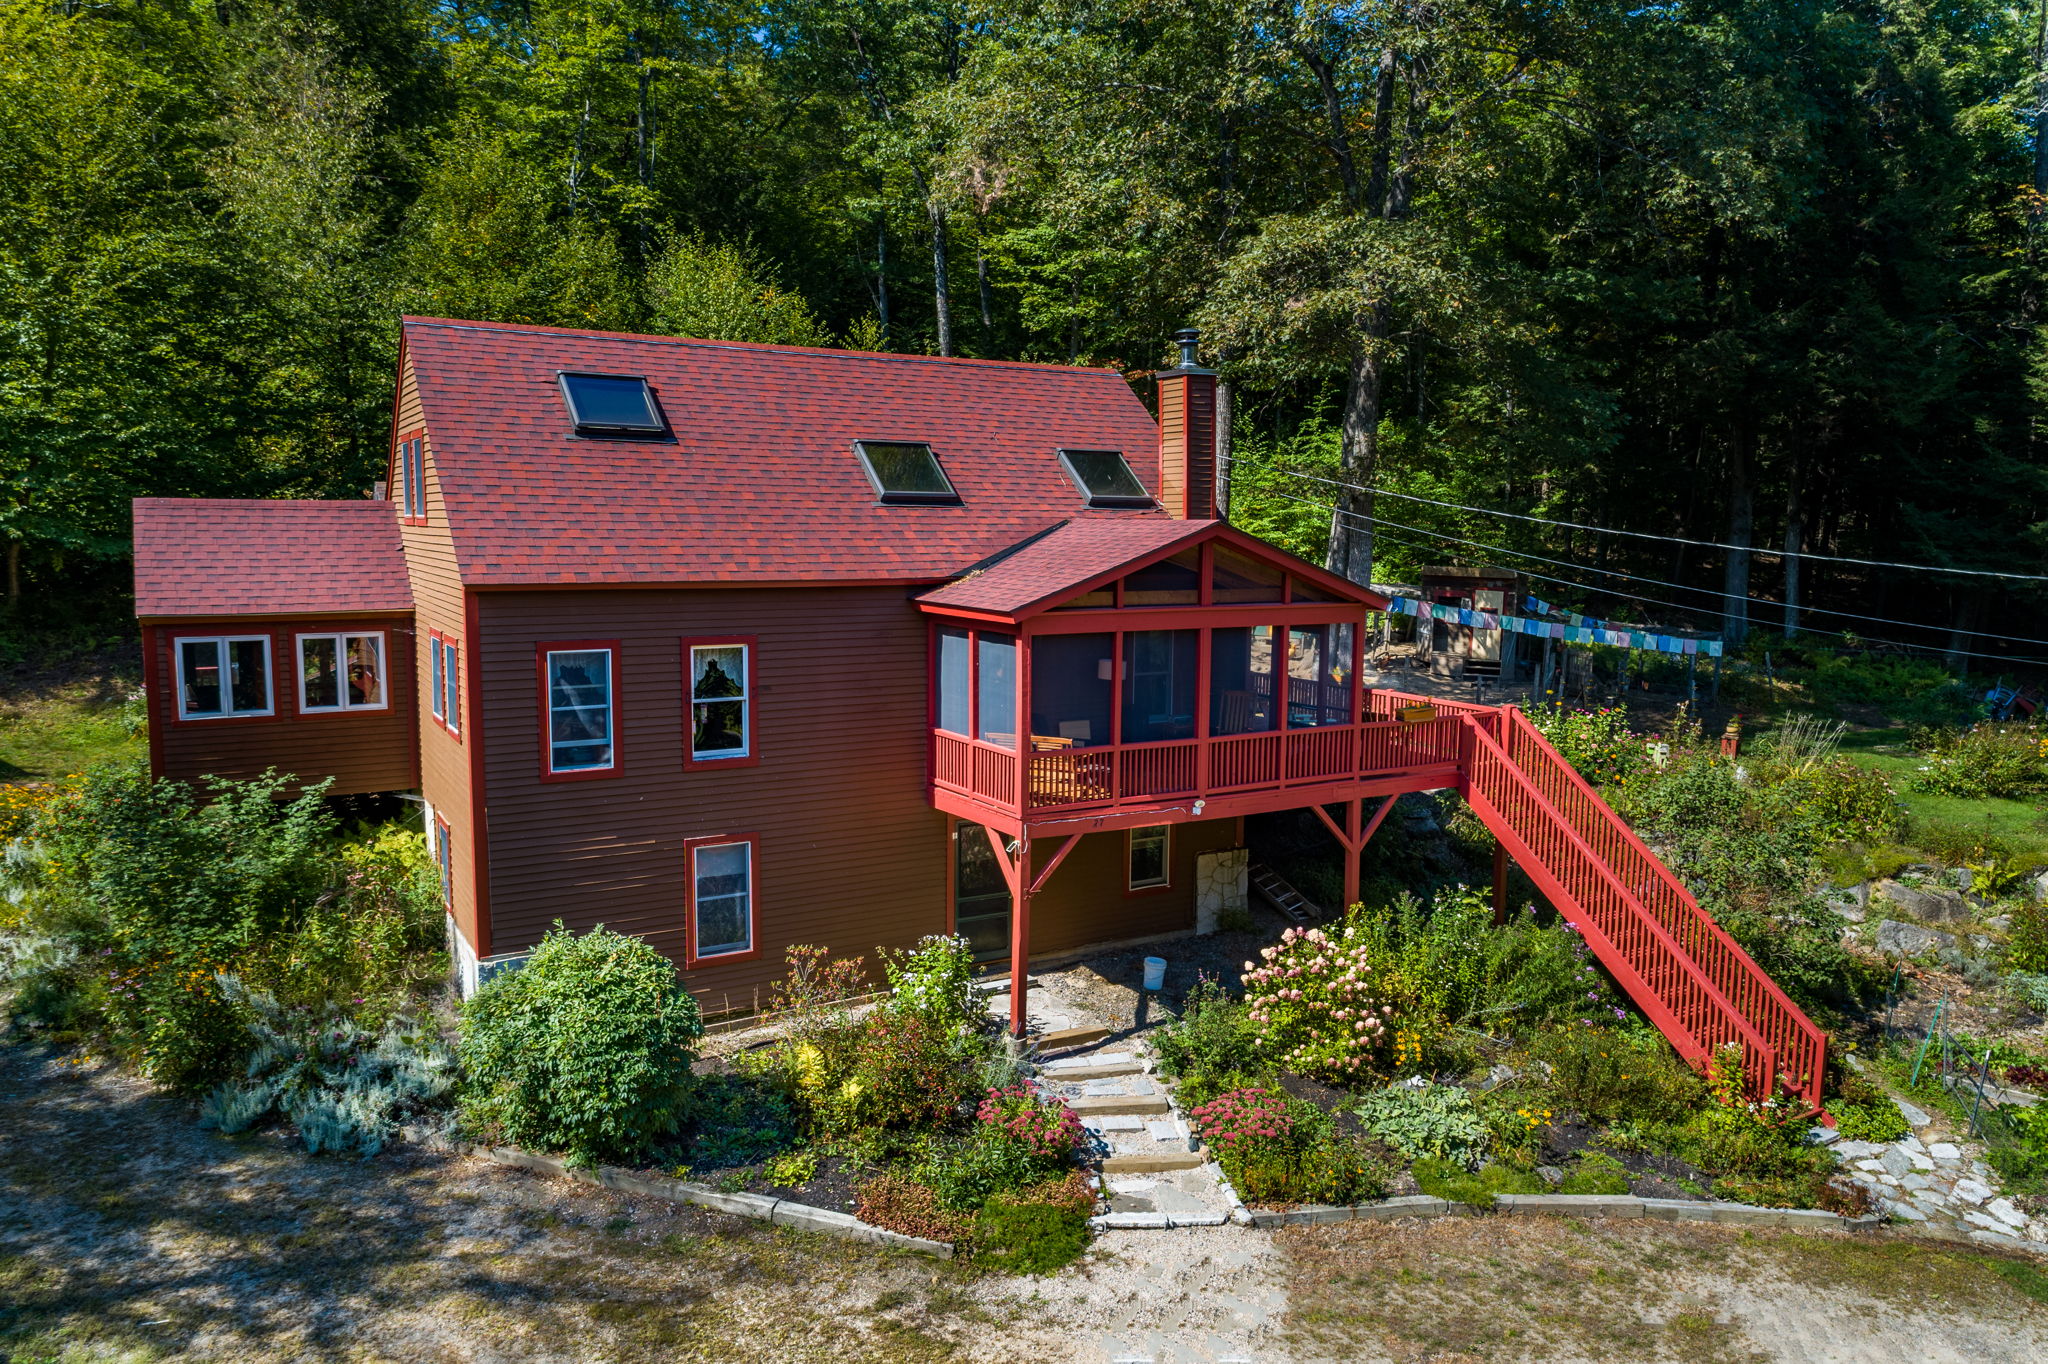  27 Forest Pond Rd, New Hampton, NH 03256, US